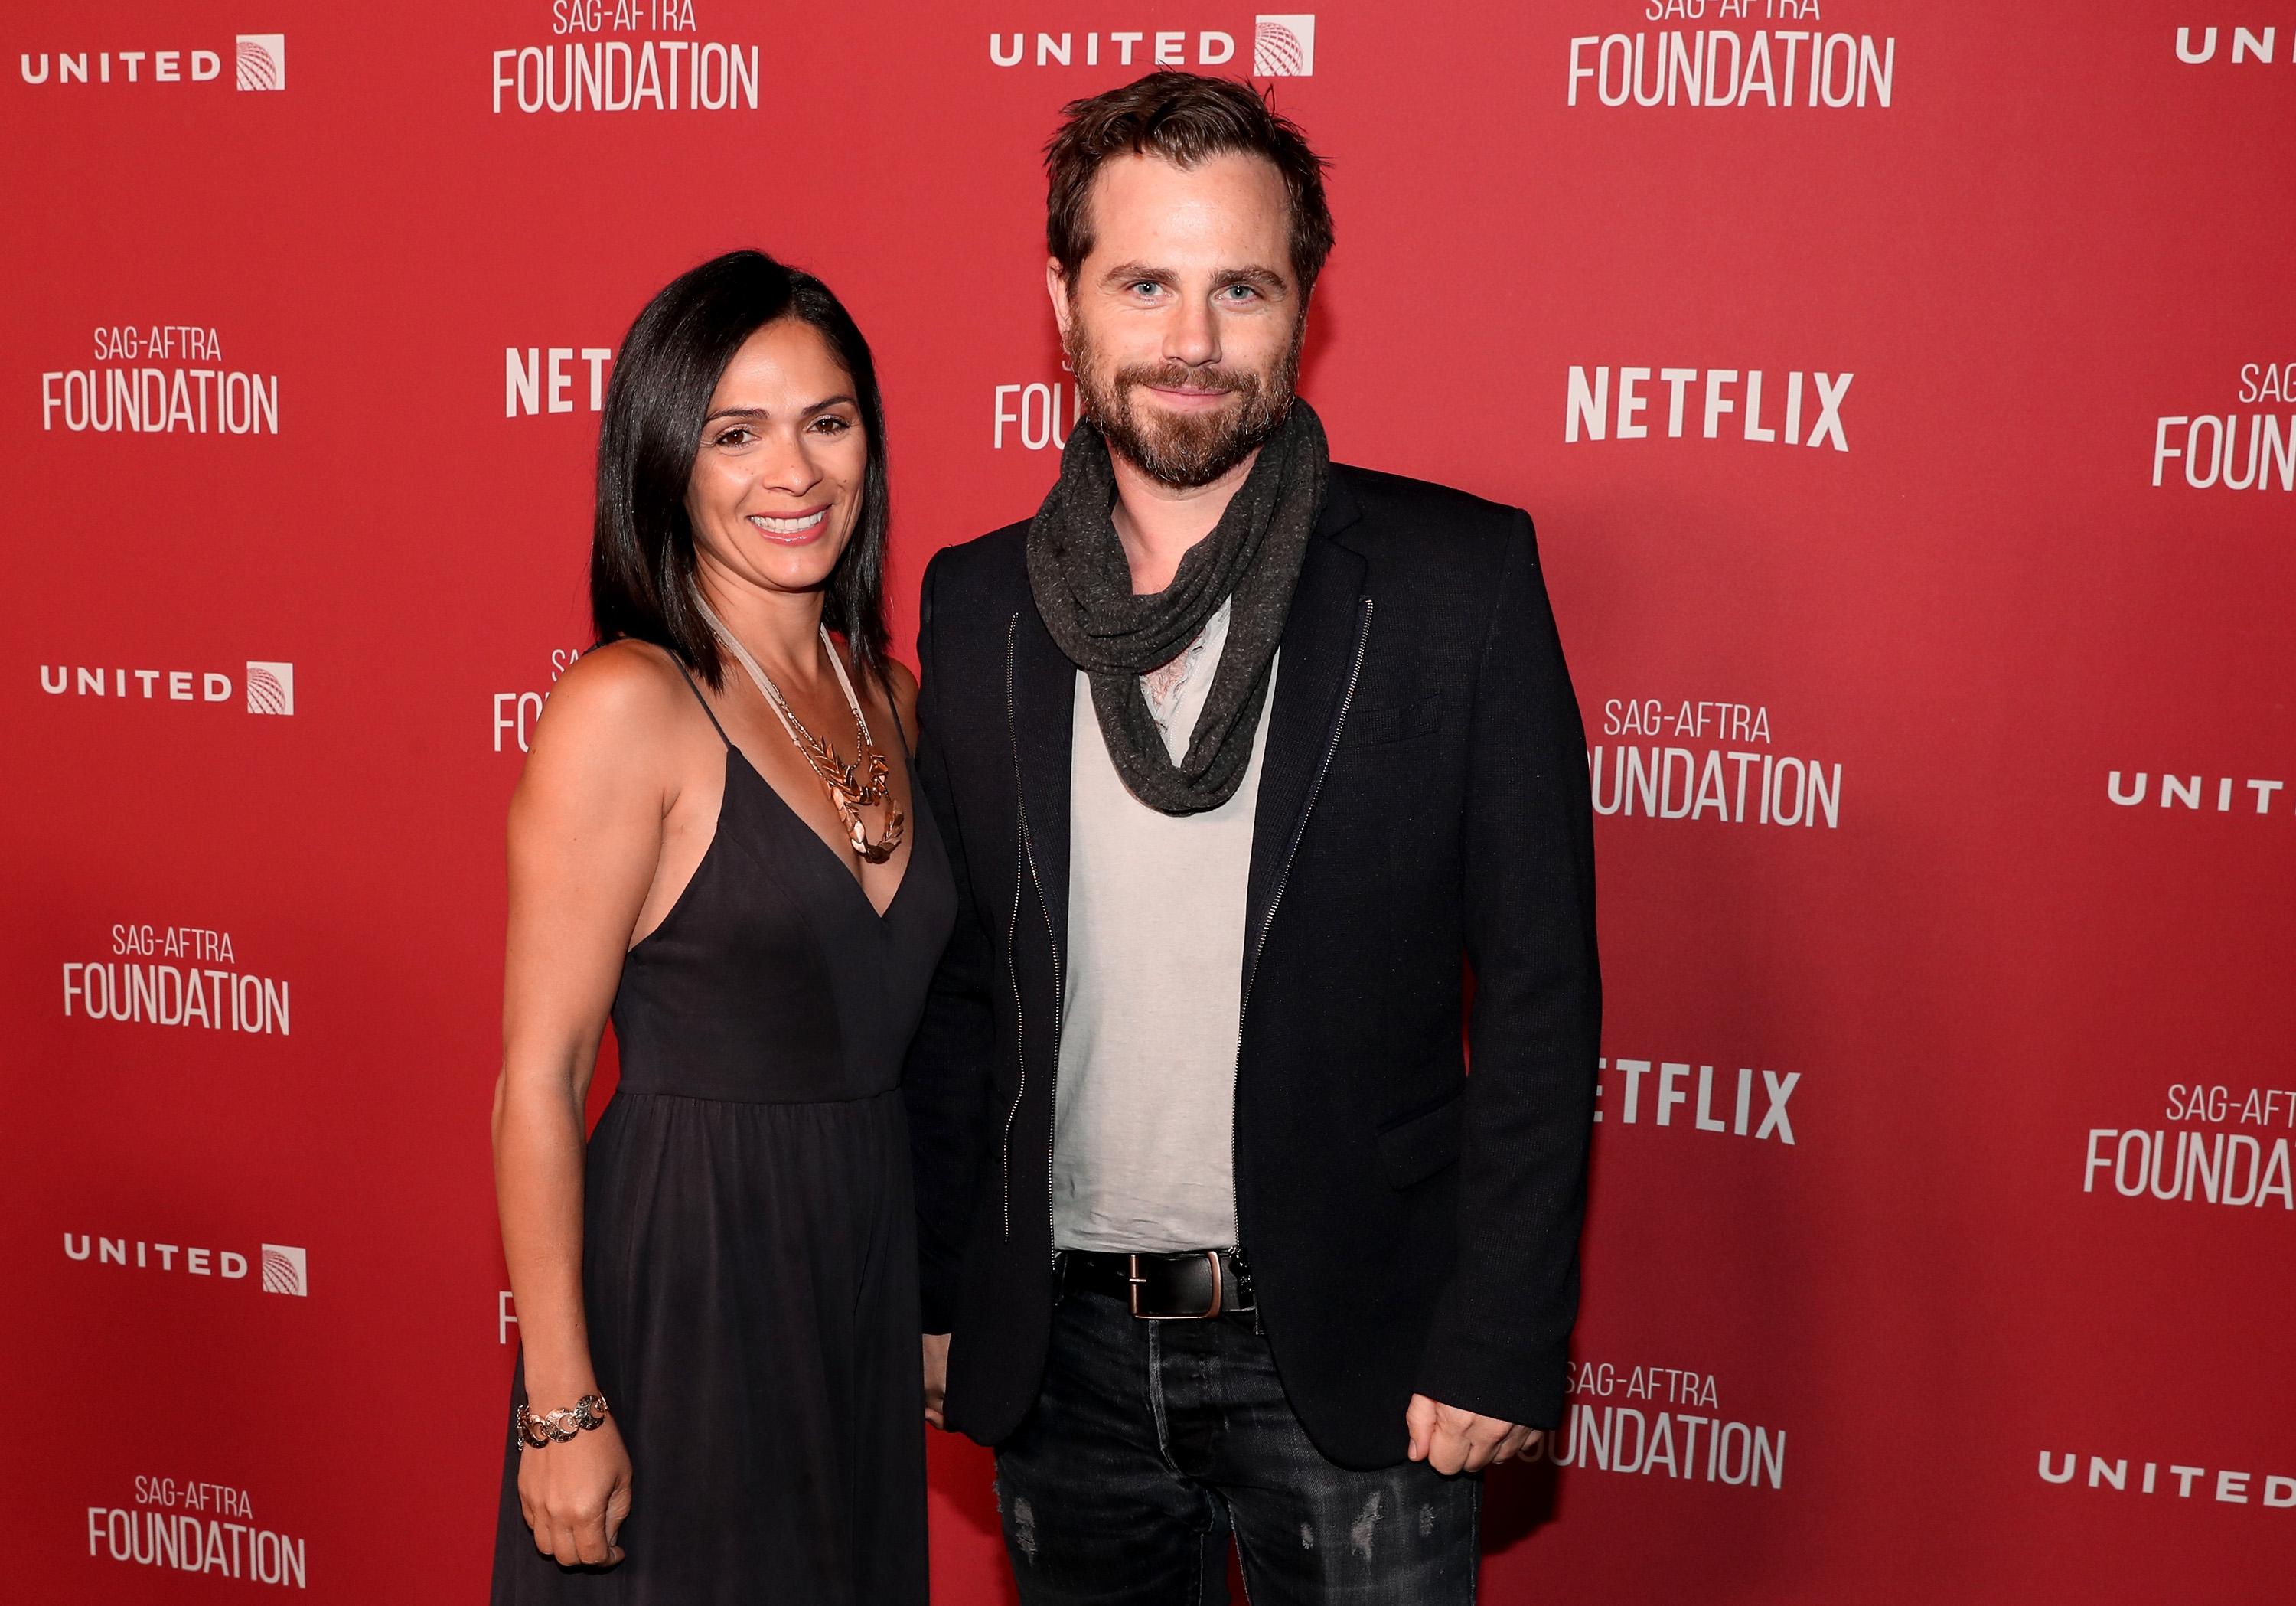 ‘Boy Meets World’ Actor Rider Strong Reveals Difficulty of Finding Work, Growing Up as a Child Actor